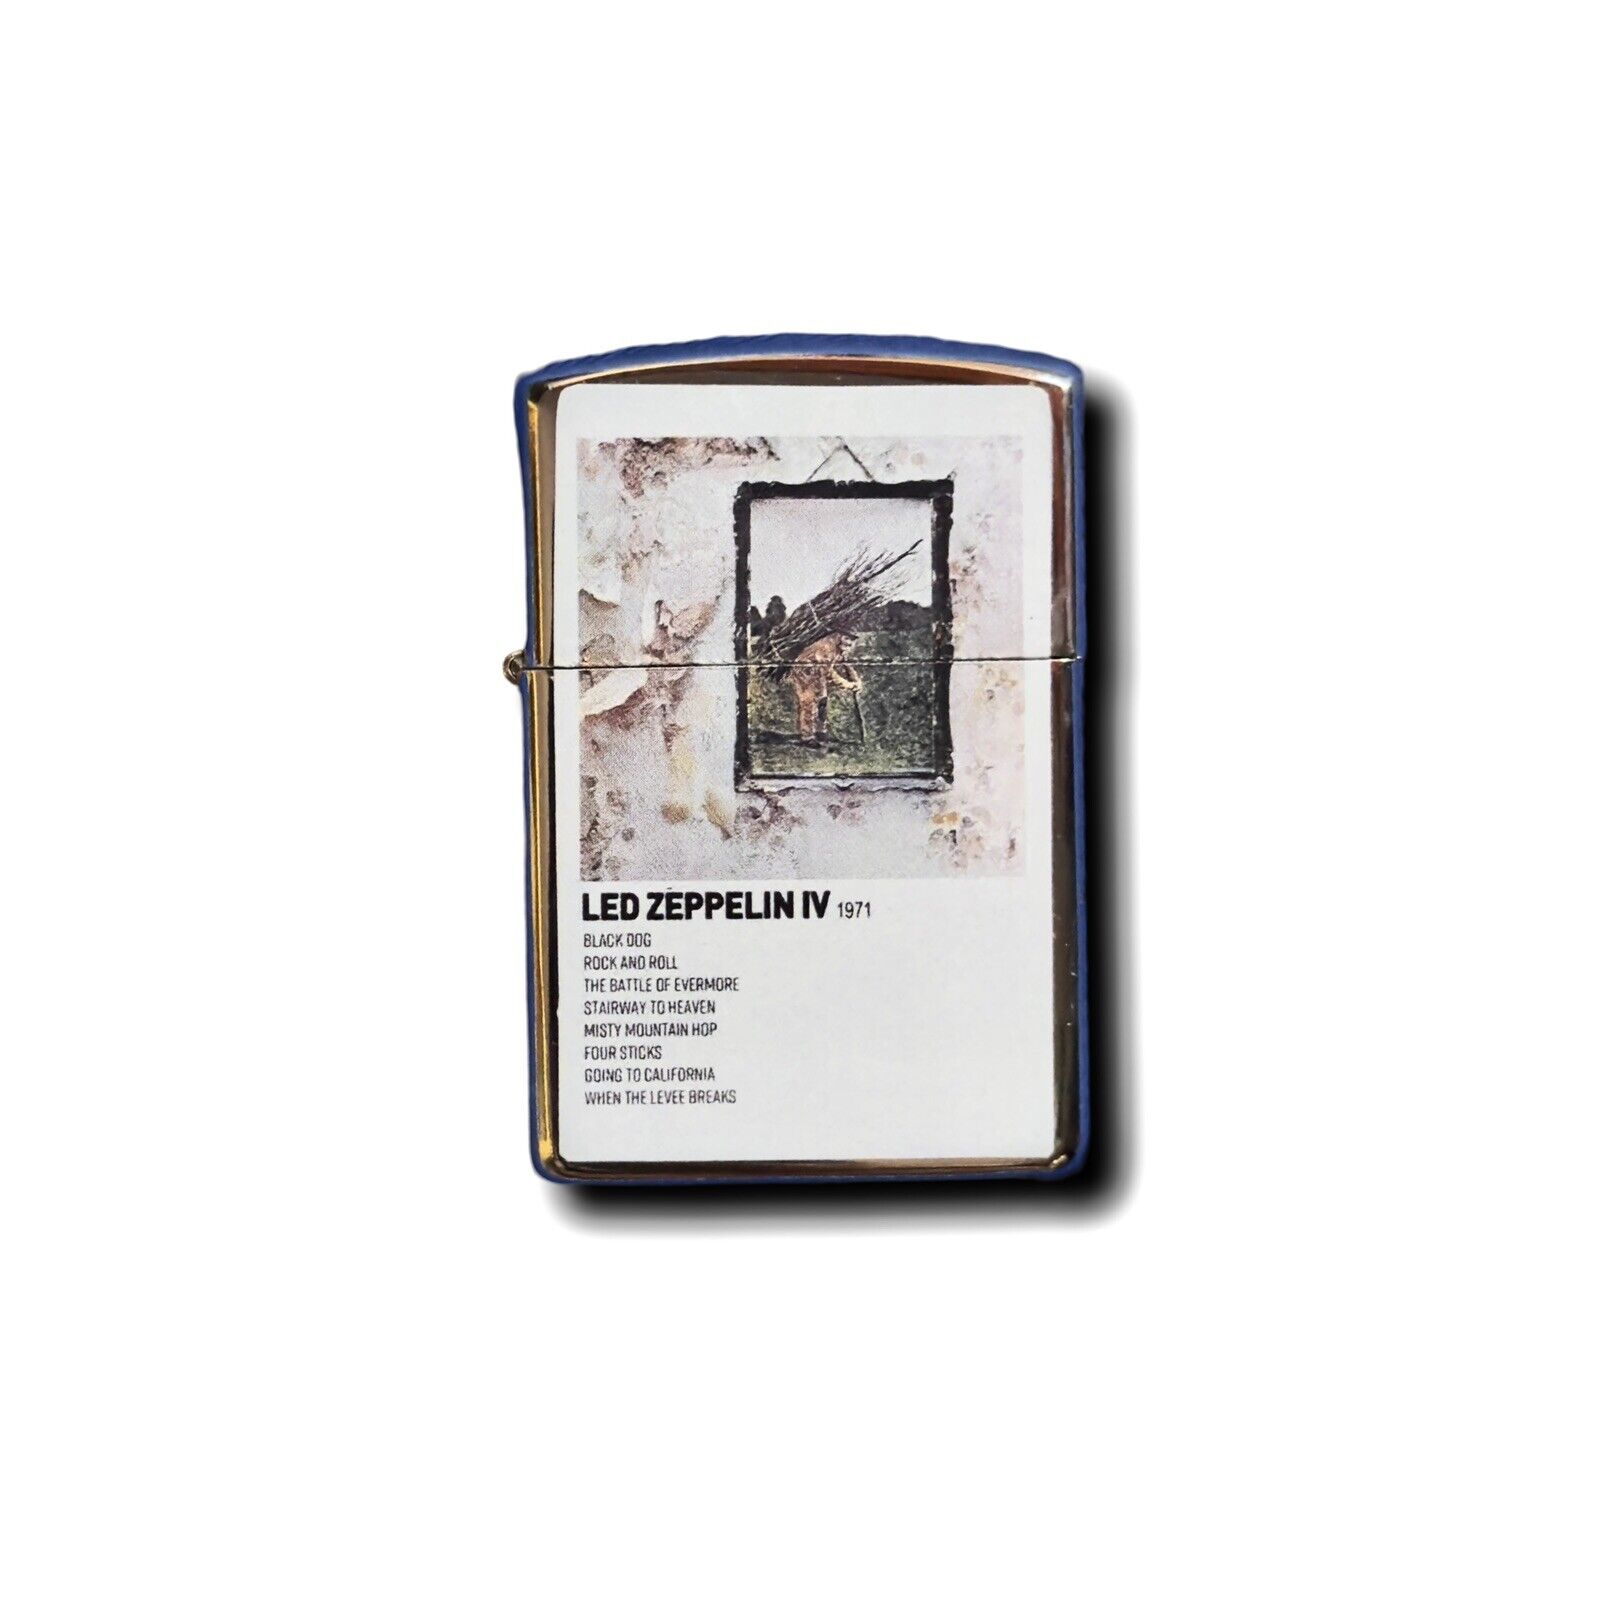 LED ZEPPELIN IV 1971 collection retro limited lighter